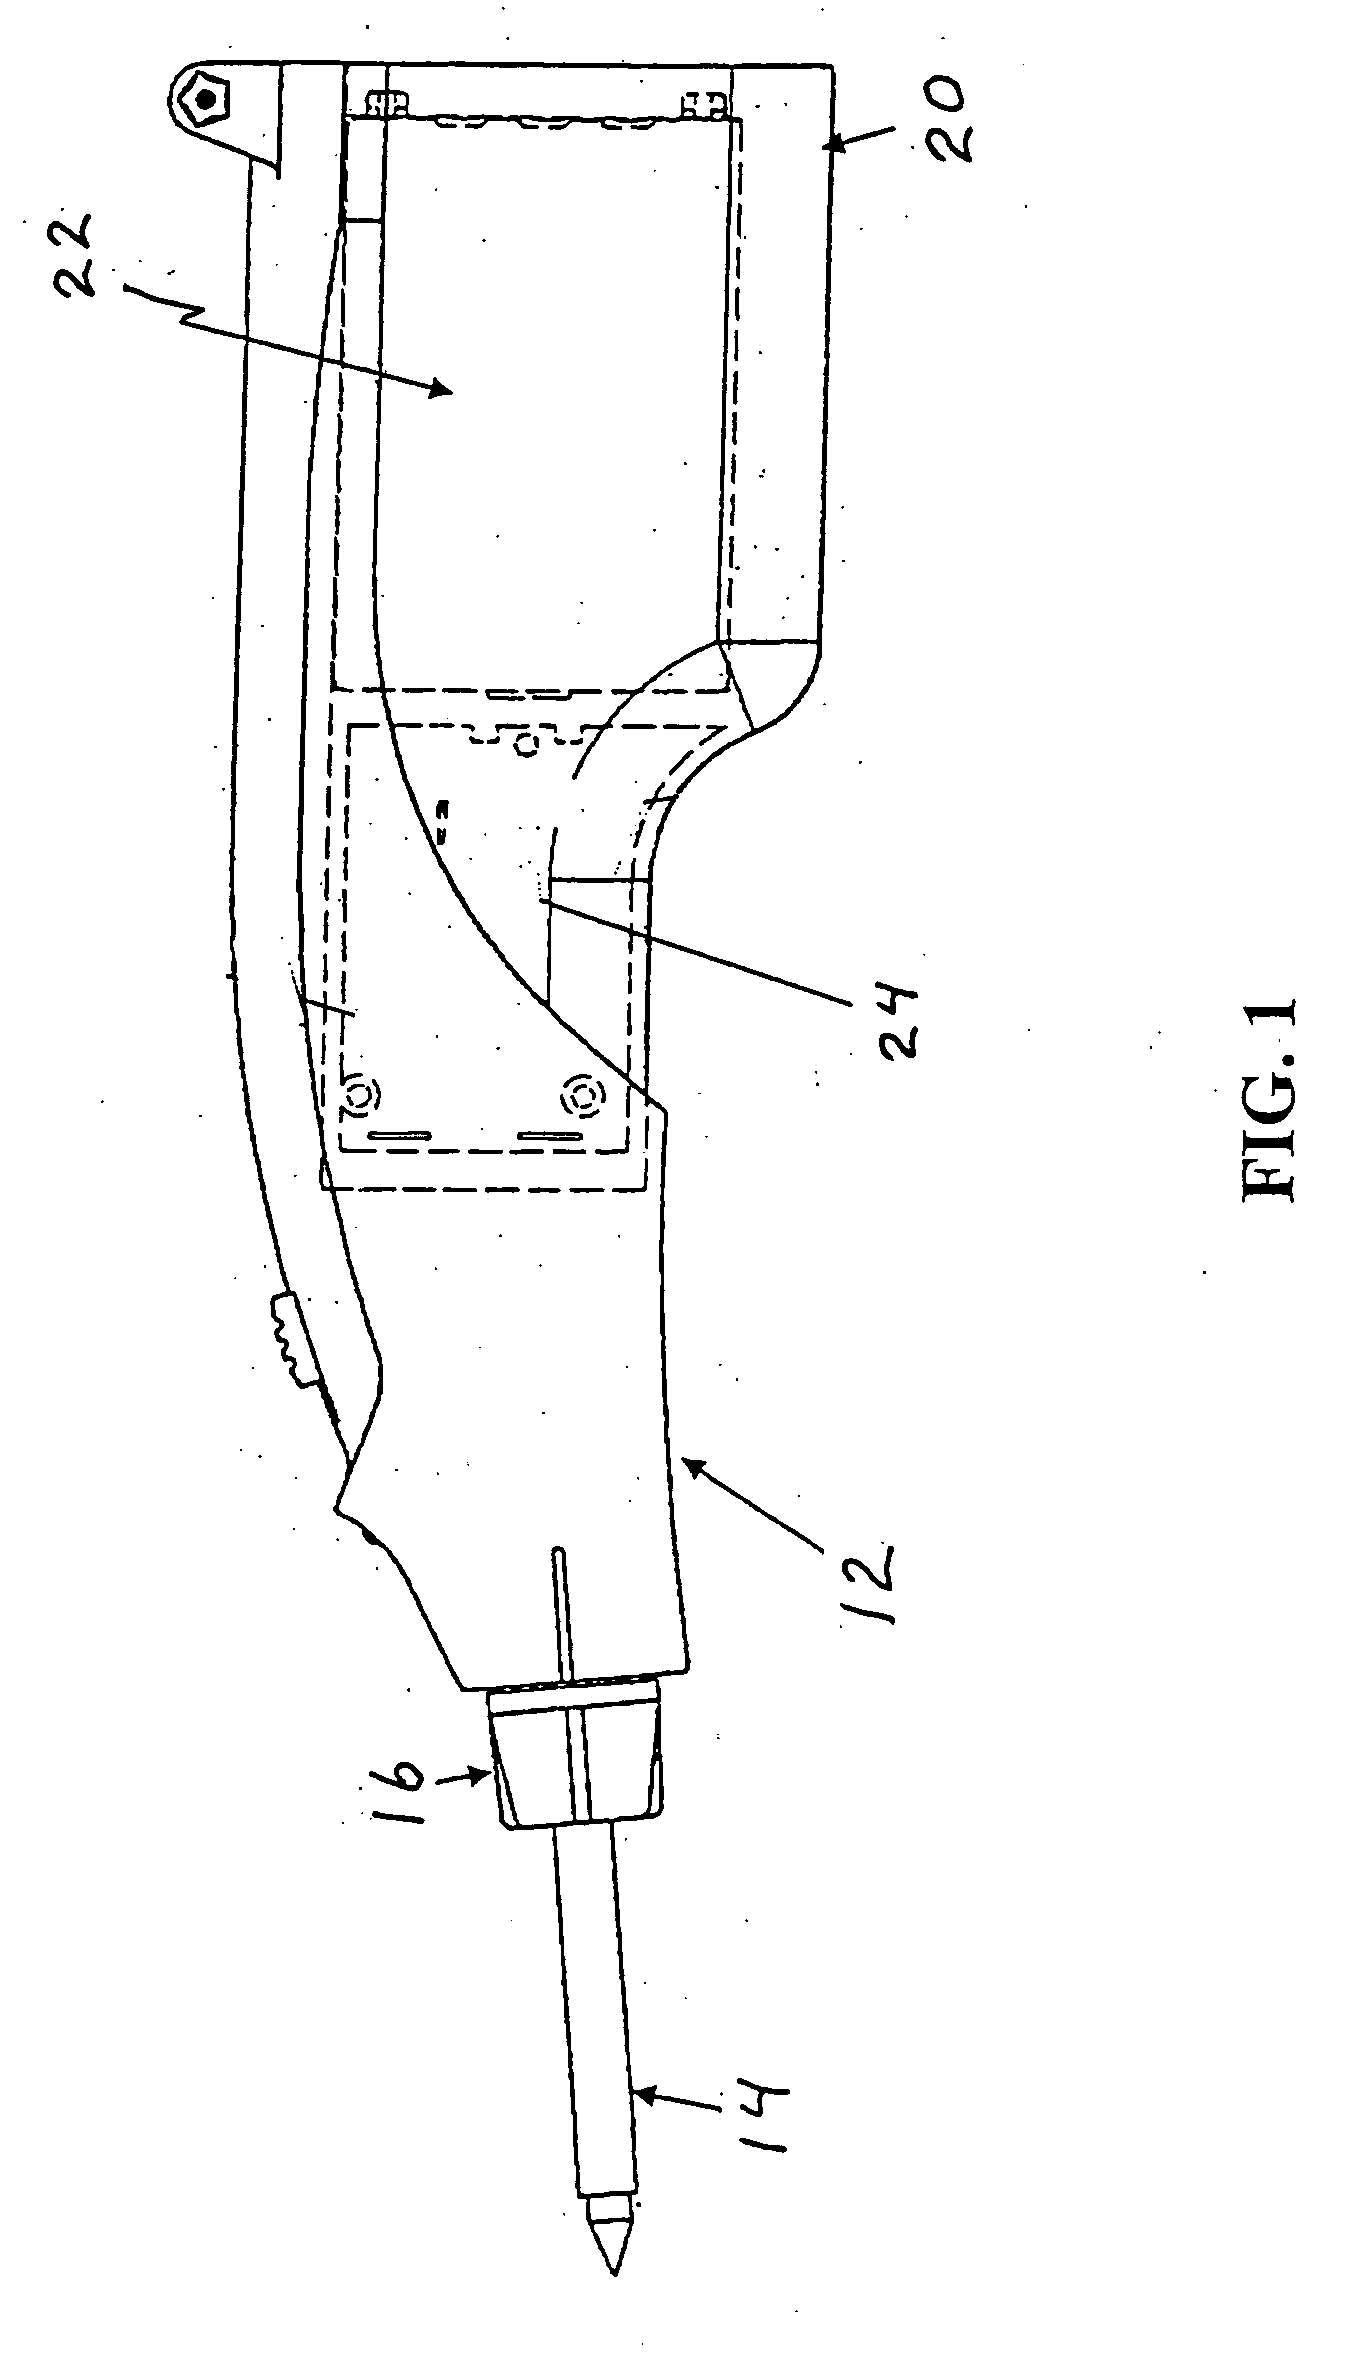 Control system for battery powered heating device